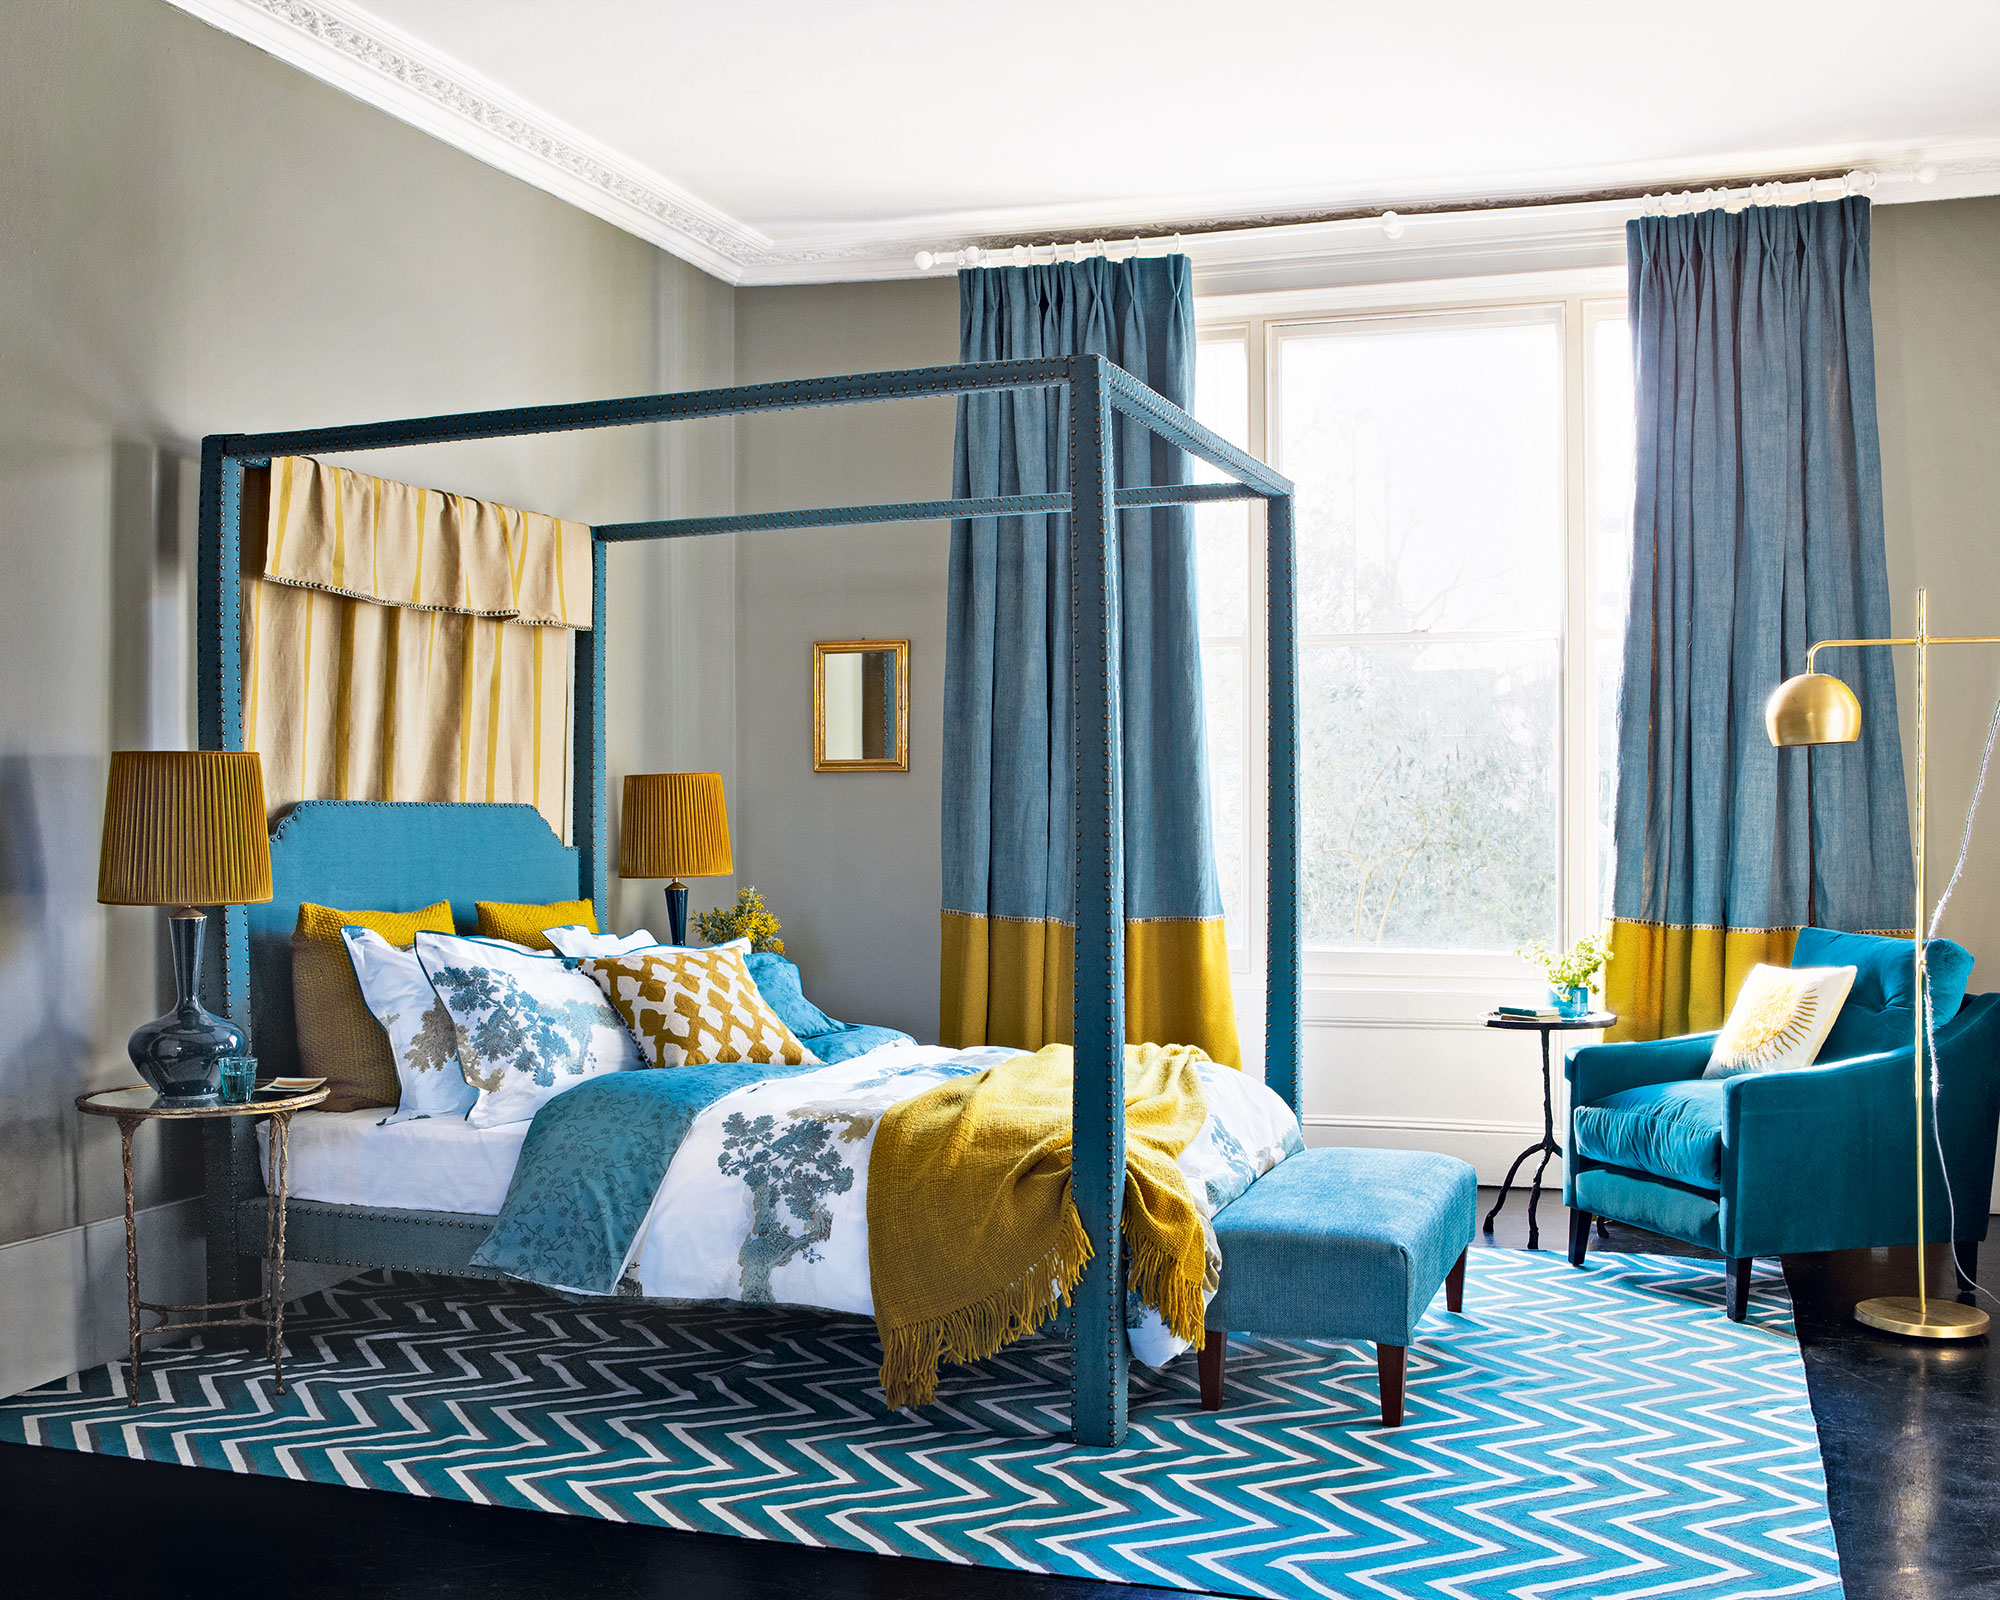 A blue bedroom with a four poster bed, yellow accents and a gold floor lamp